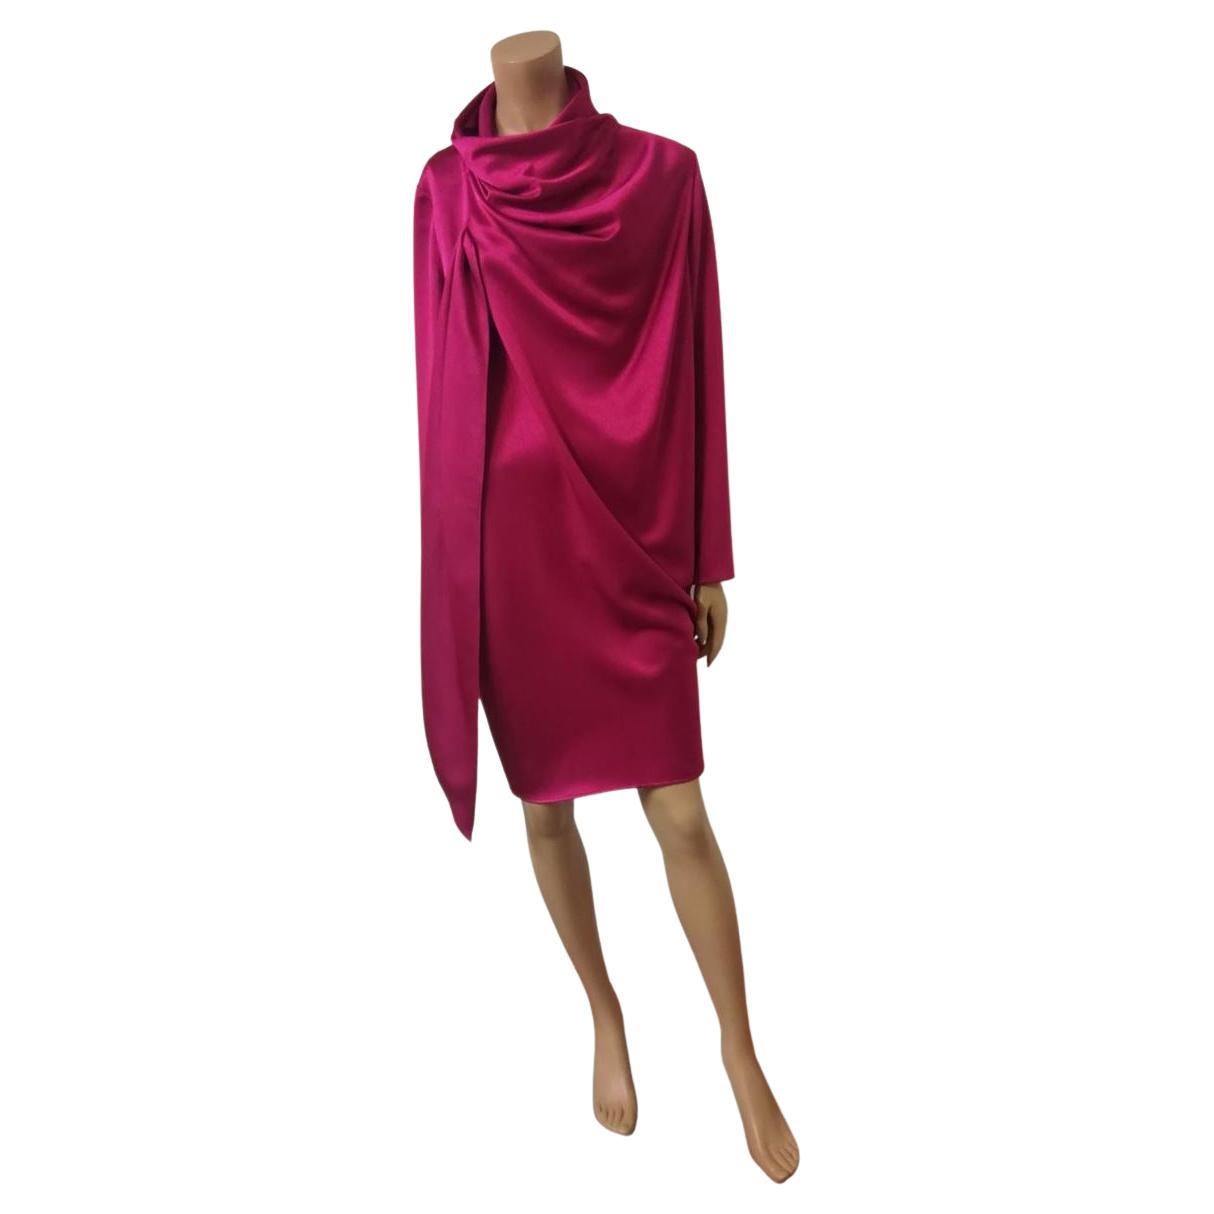 Polyester Fuchsia color Long sleeve Back zip Total length cm 96 (37.7 inches) Shoulder cm 43 (16.9 inches)
